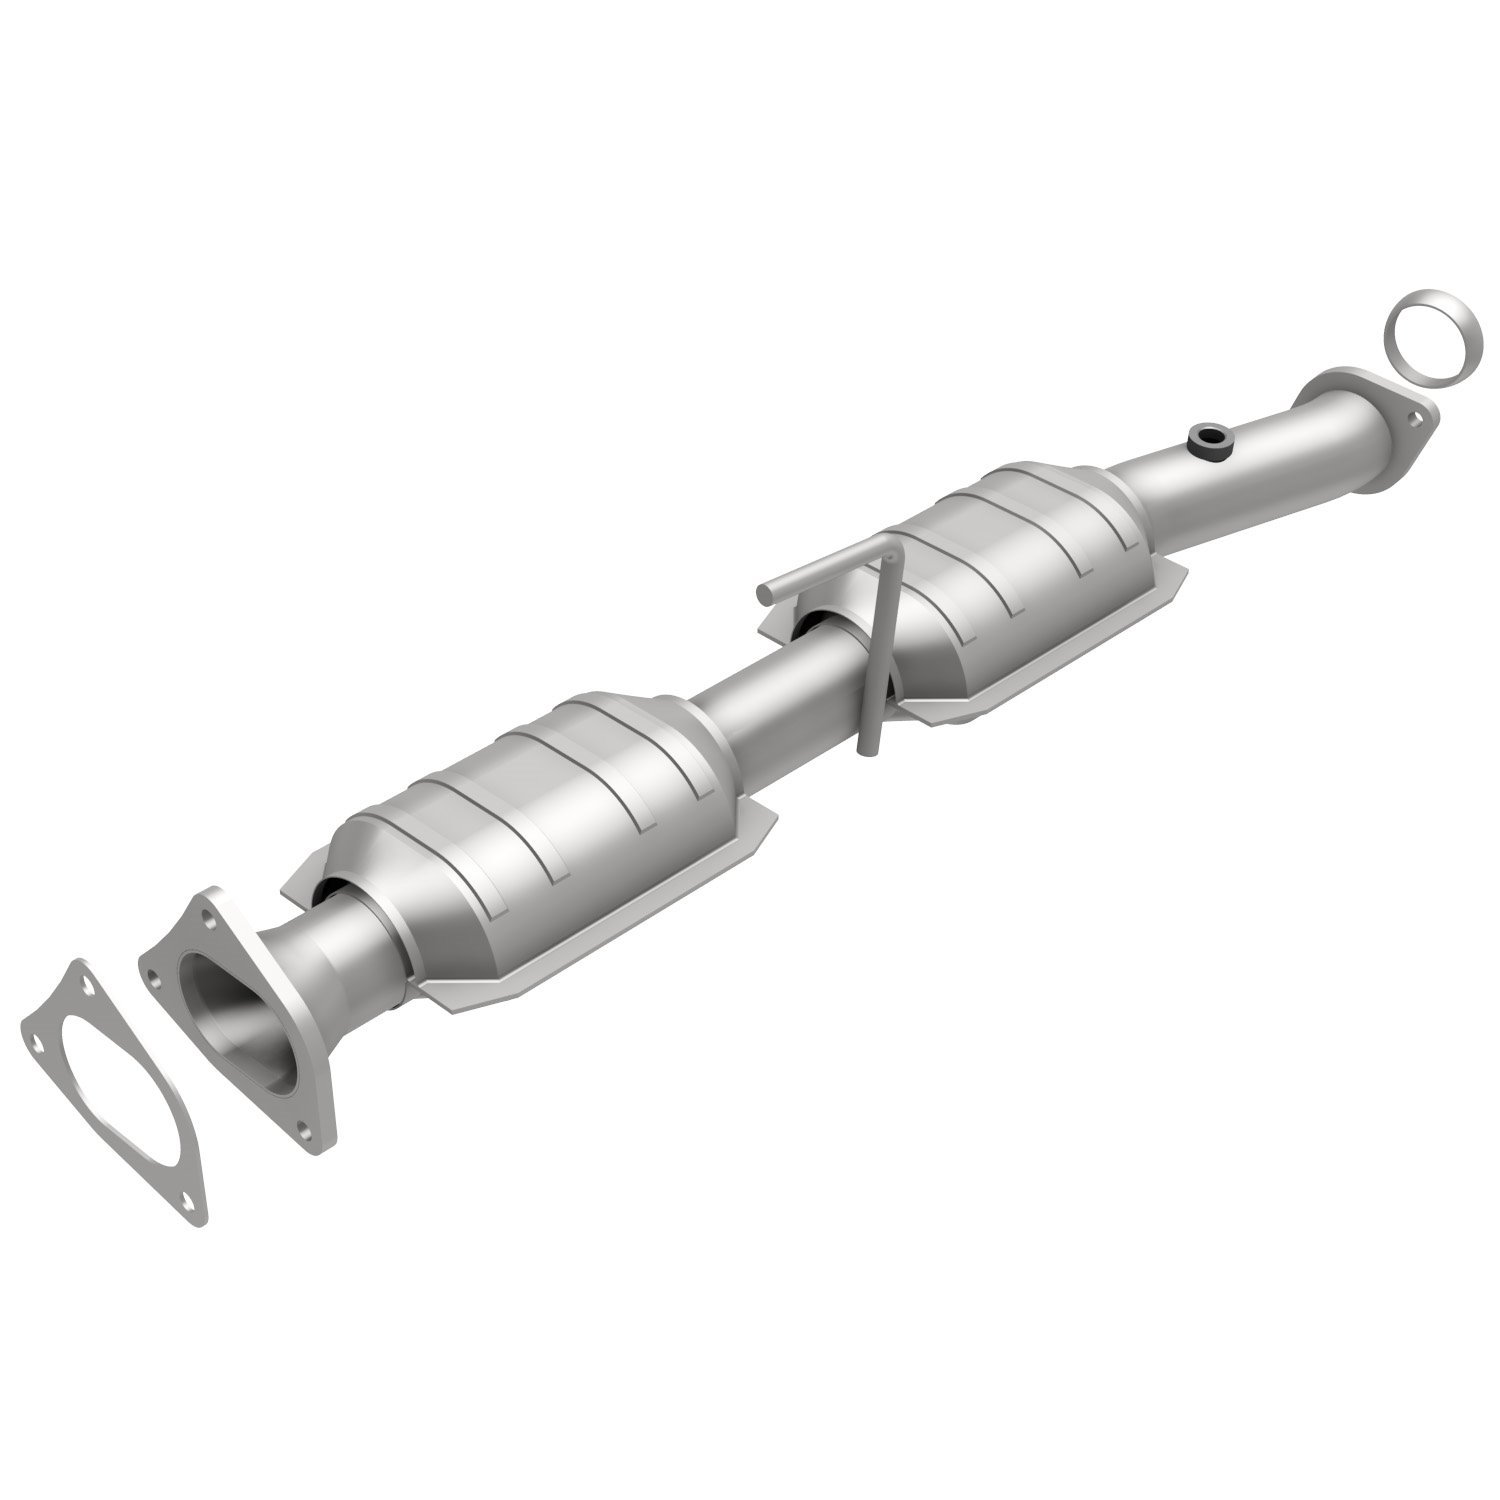 HM Grade Federal / EPA Compliant Direct-Fit Catalytic Converter 23385